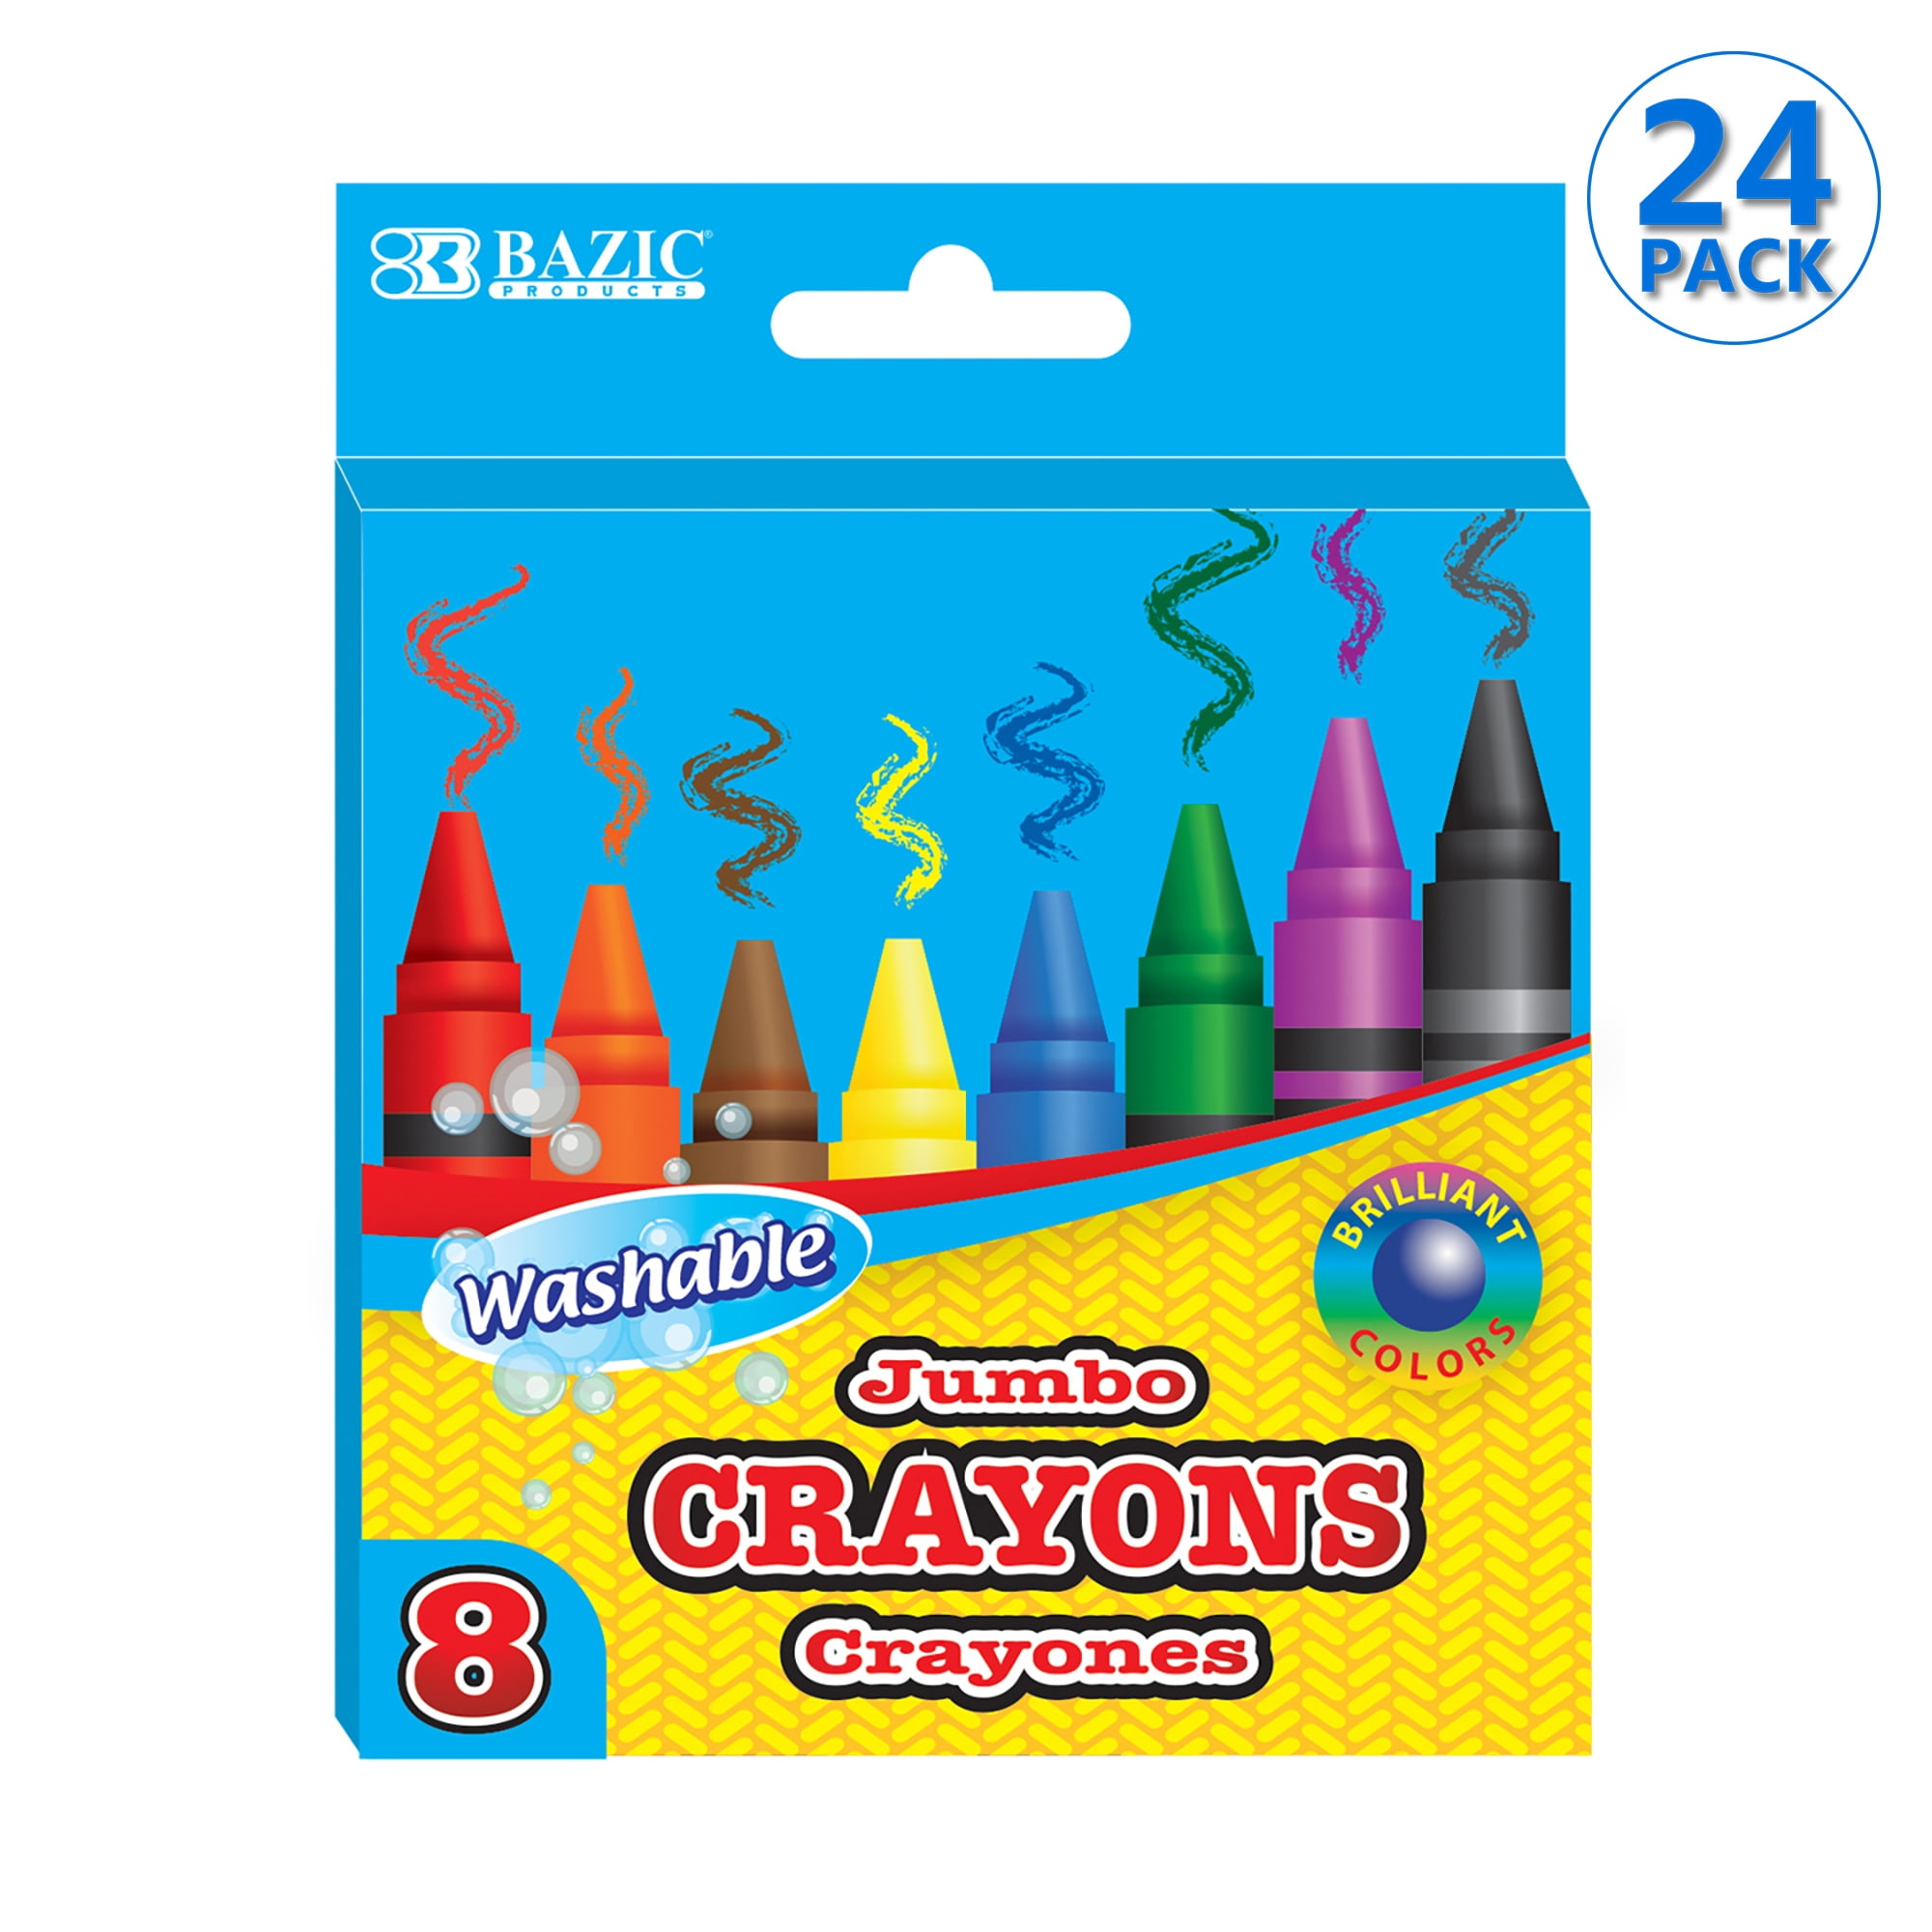 Color Swell Crayons Bulk 6 Pack, 24 Crayons per Pack, 144 Total Crayons 